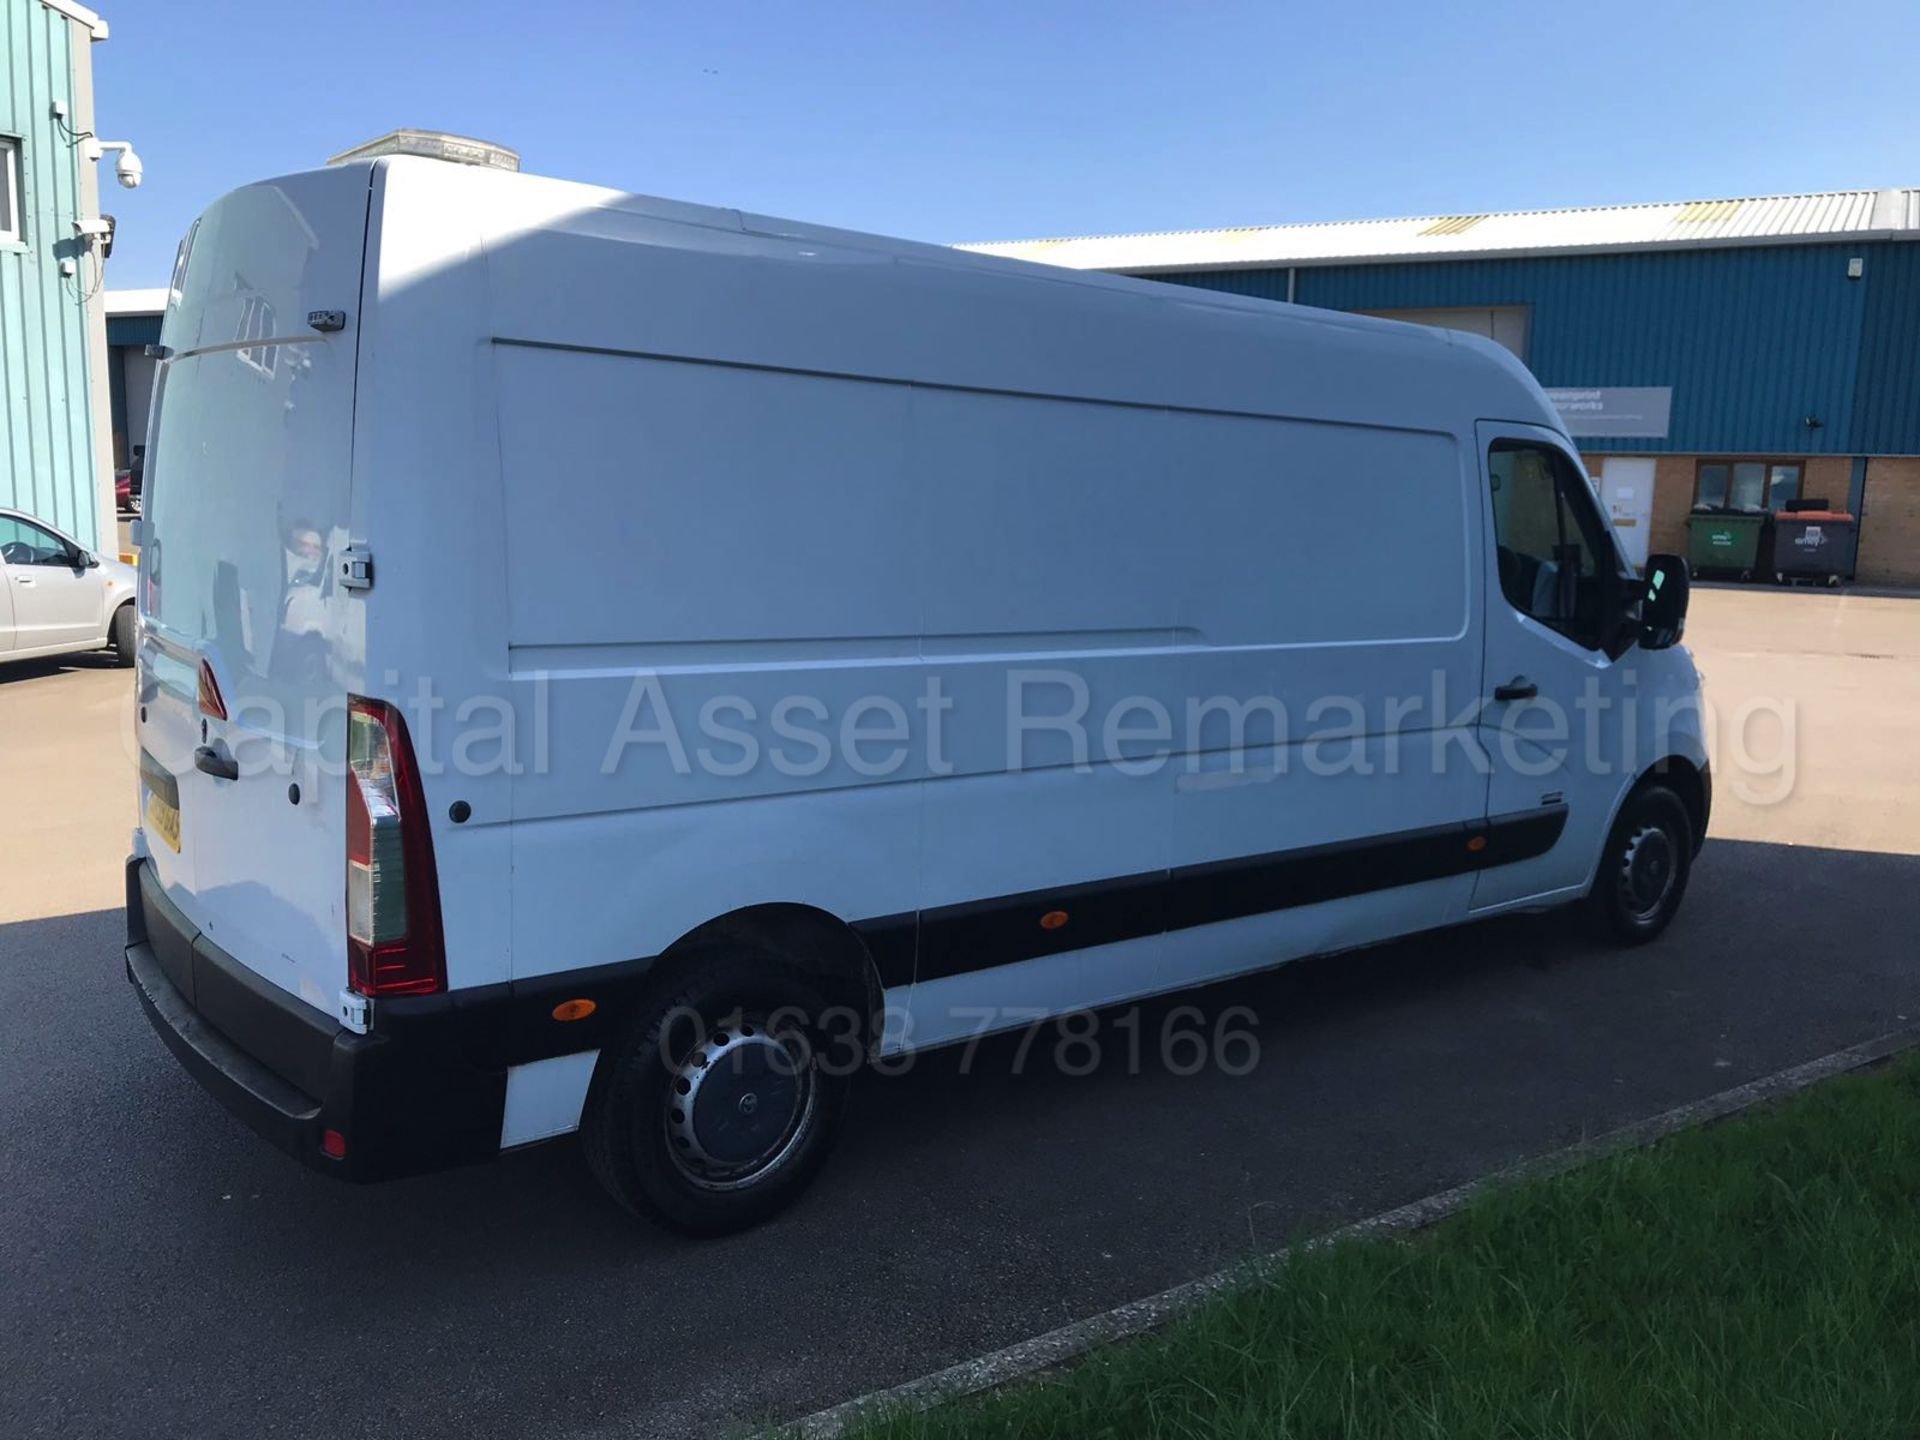 (On Sale) VAUXHALL MOVANO F3500 'LWB HI-ROOF' (2013 MODEL) '2.3 CDTI - 125 BHP - 6 SPEED' *AIR CON* - Image 11 of 21